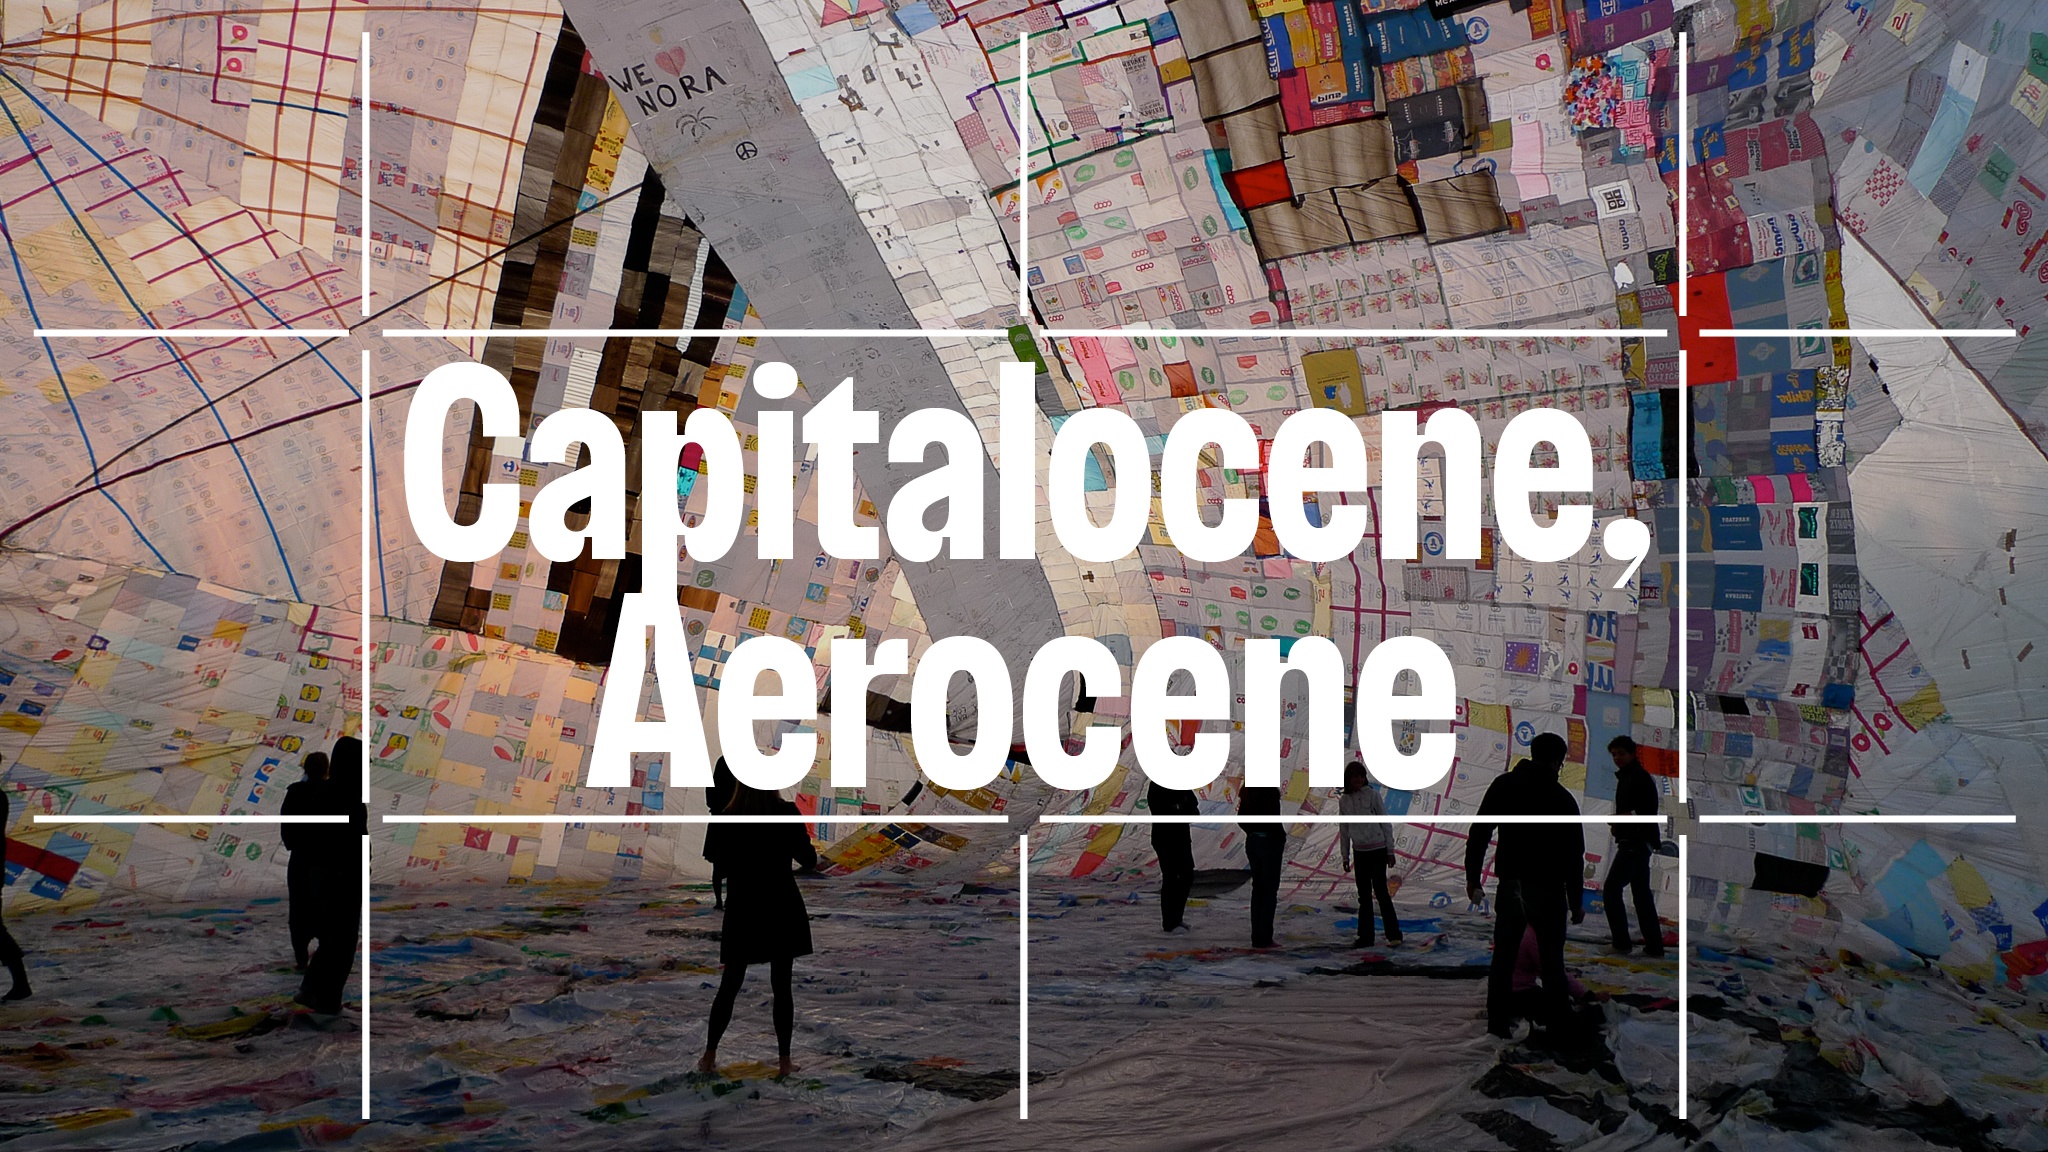 The event title "Capitalocene, Aerocene" overlaid on a photo of people wandering around a cavernous inflated balloon made from a colorful patchwork of recycled plastic bags.